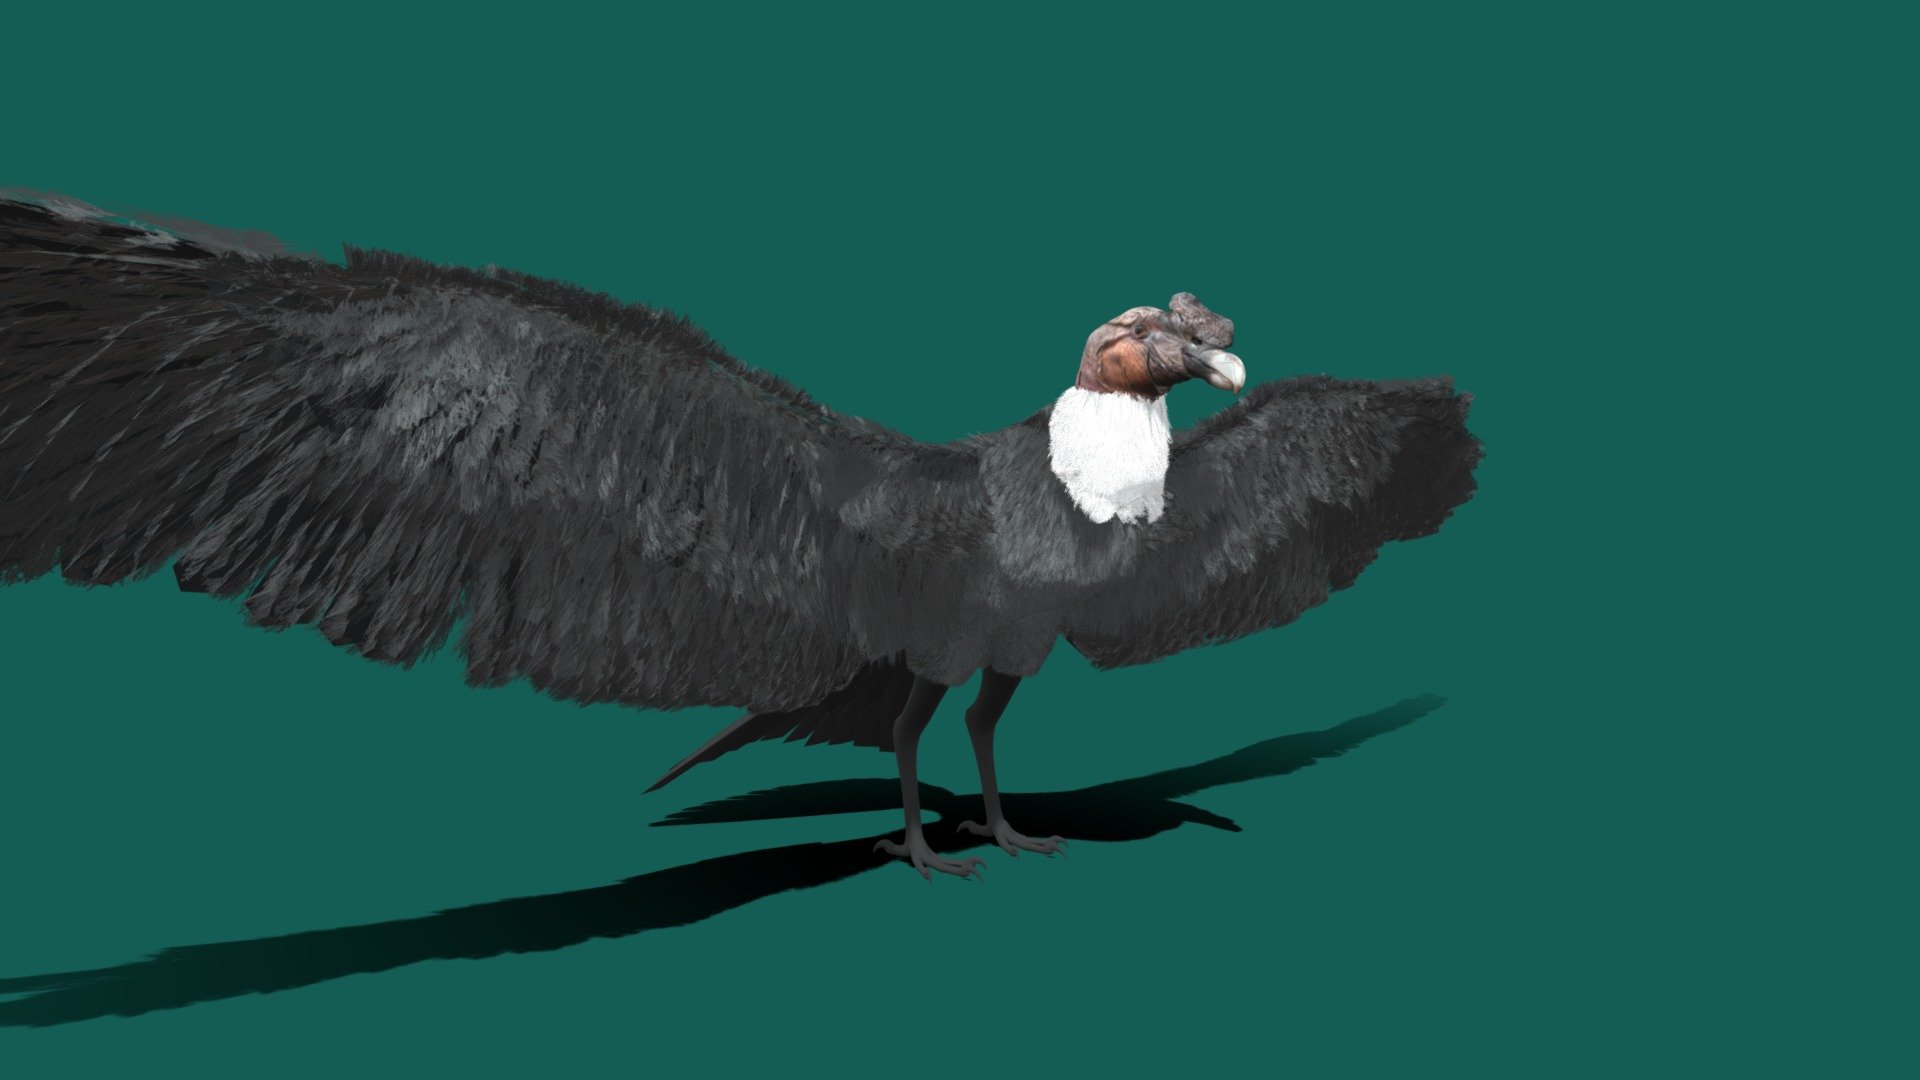 The Andean condor 

is a giant South American Cathartid vulture and is the only member of the genus Vultur. Found in the Andes mountains and adjacent Pacific coasts of western South America, the Andean condor is the largest flying bird in the world by combined measurement of weight and wingspan 3d model